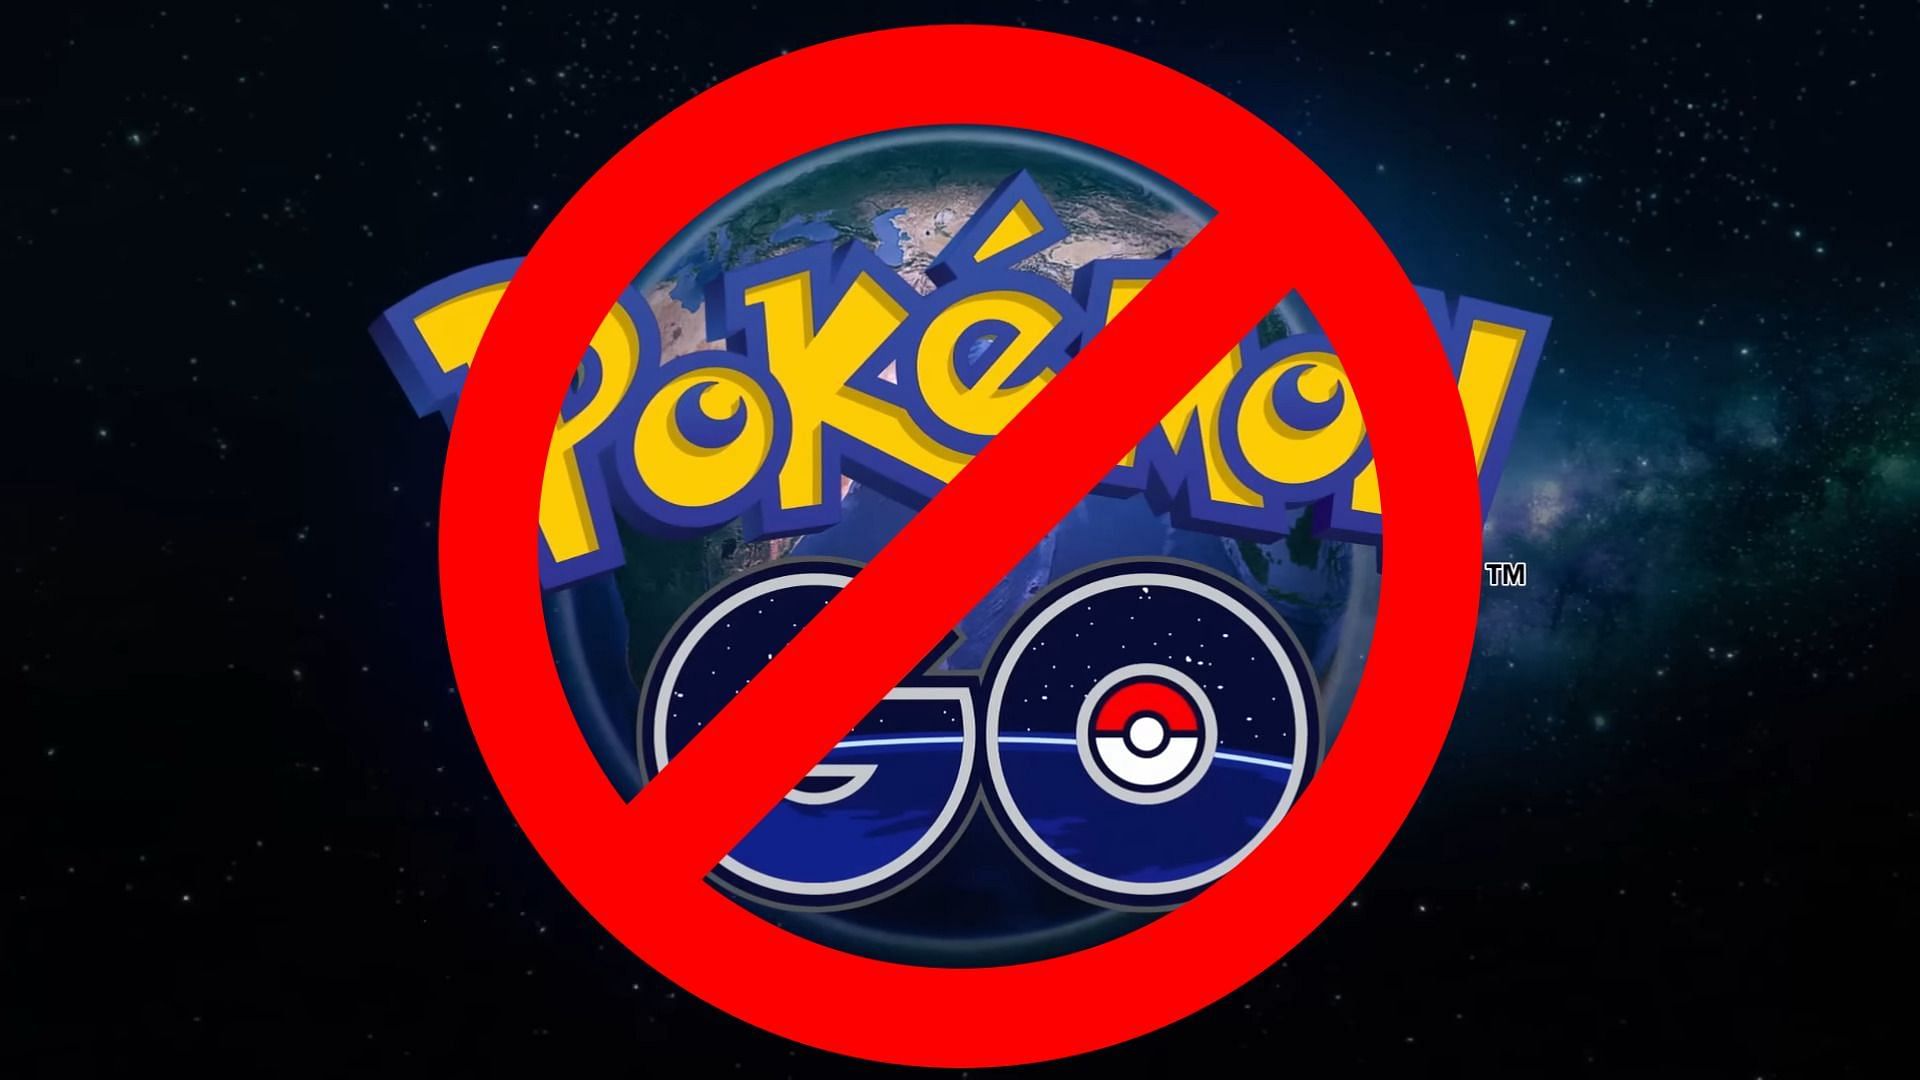 All countries Pokemon GO is banned in